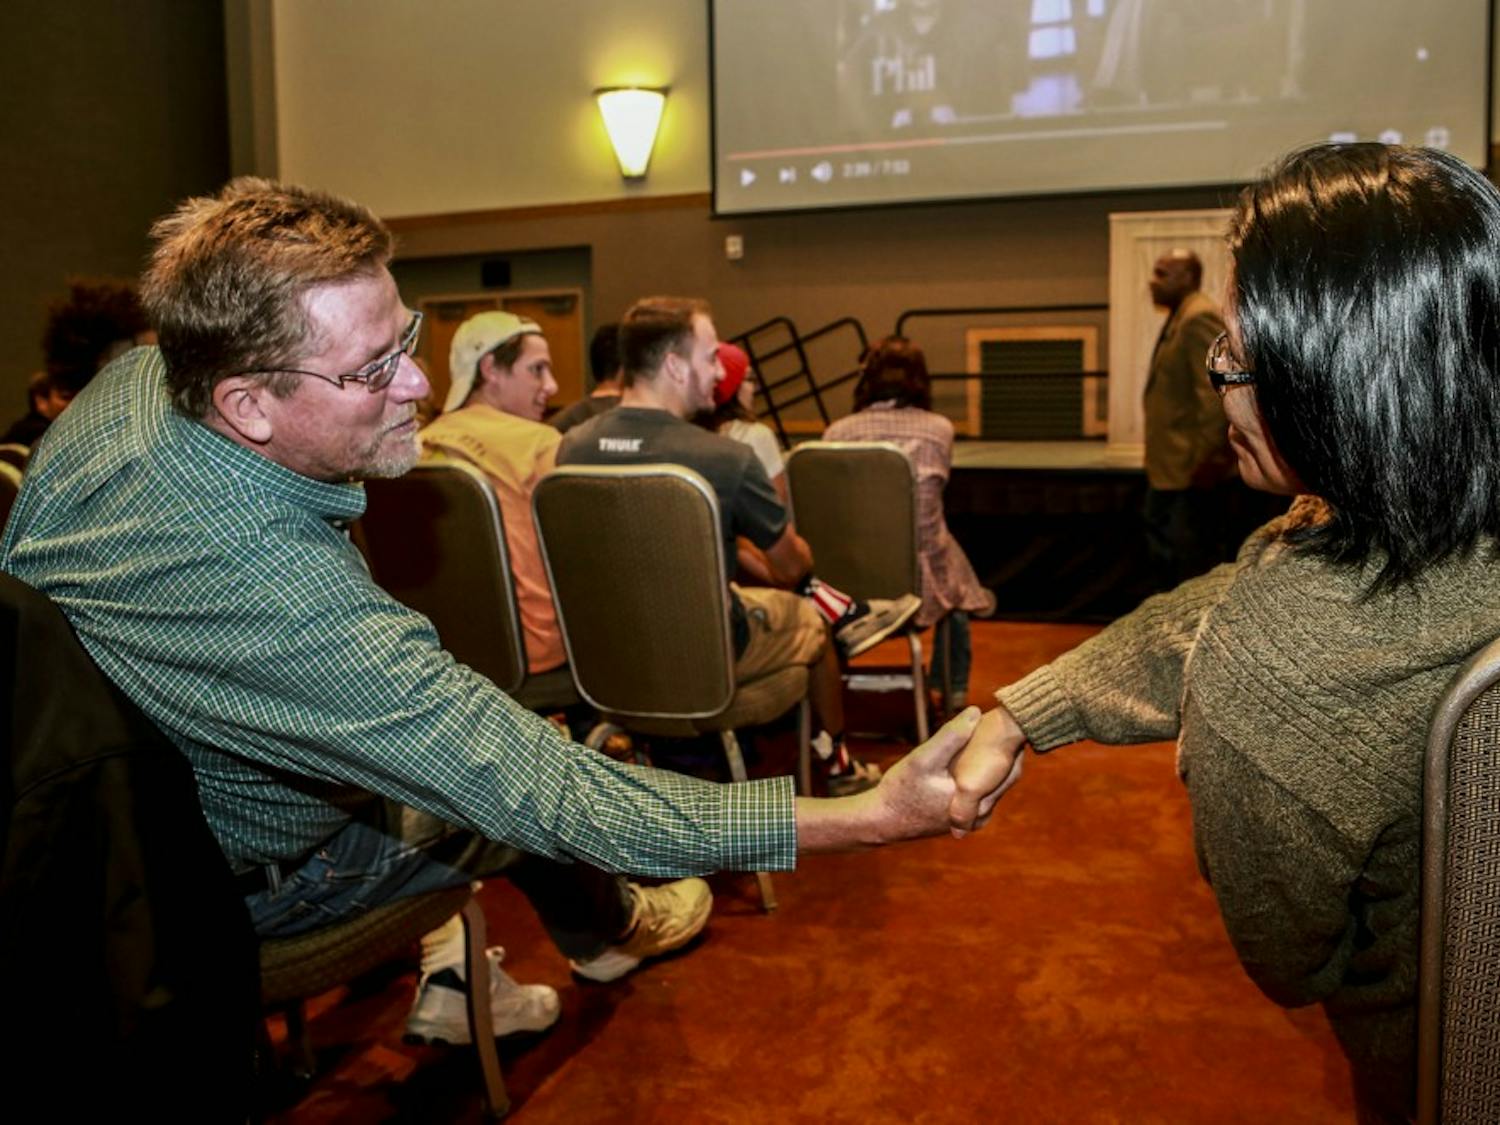 Loreal Black Shawl, right, shakes hands with Larry Ostrem at the Coach Ken Carter talk at the UNM SUB ballroom on Tuesday, Oct. 10, 2017.
